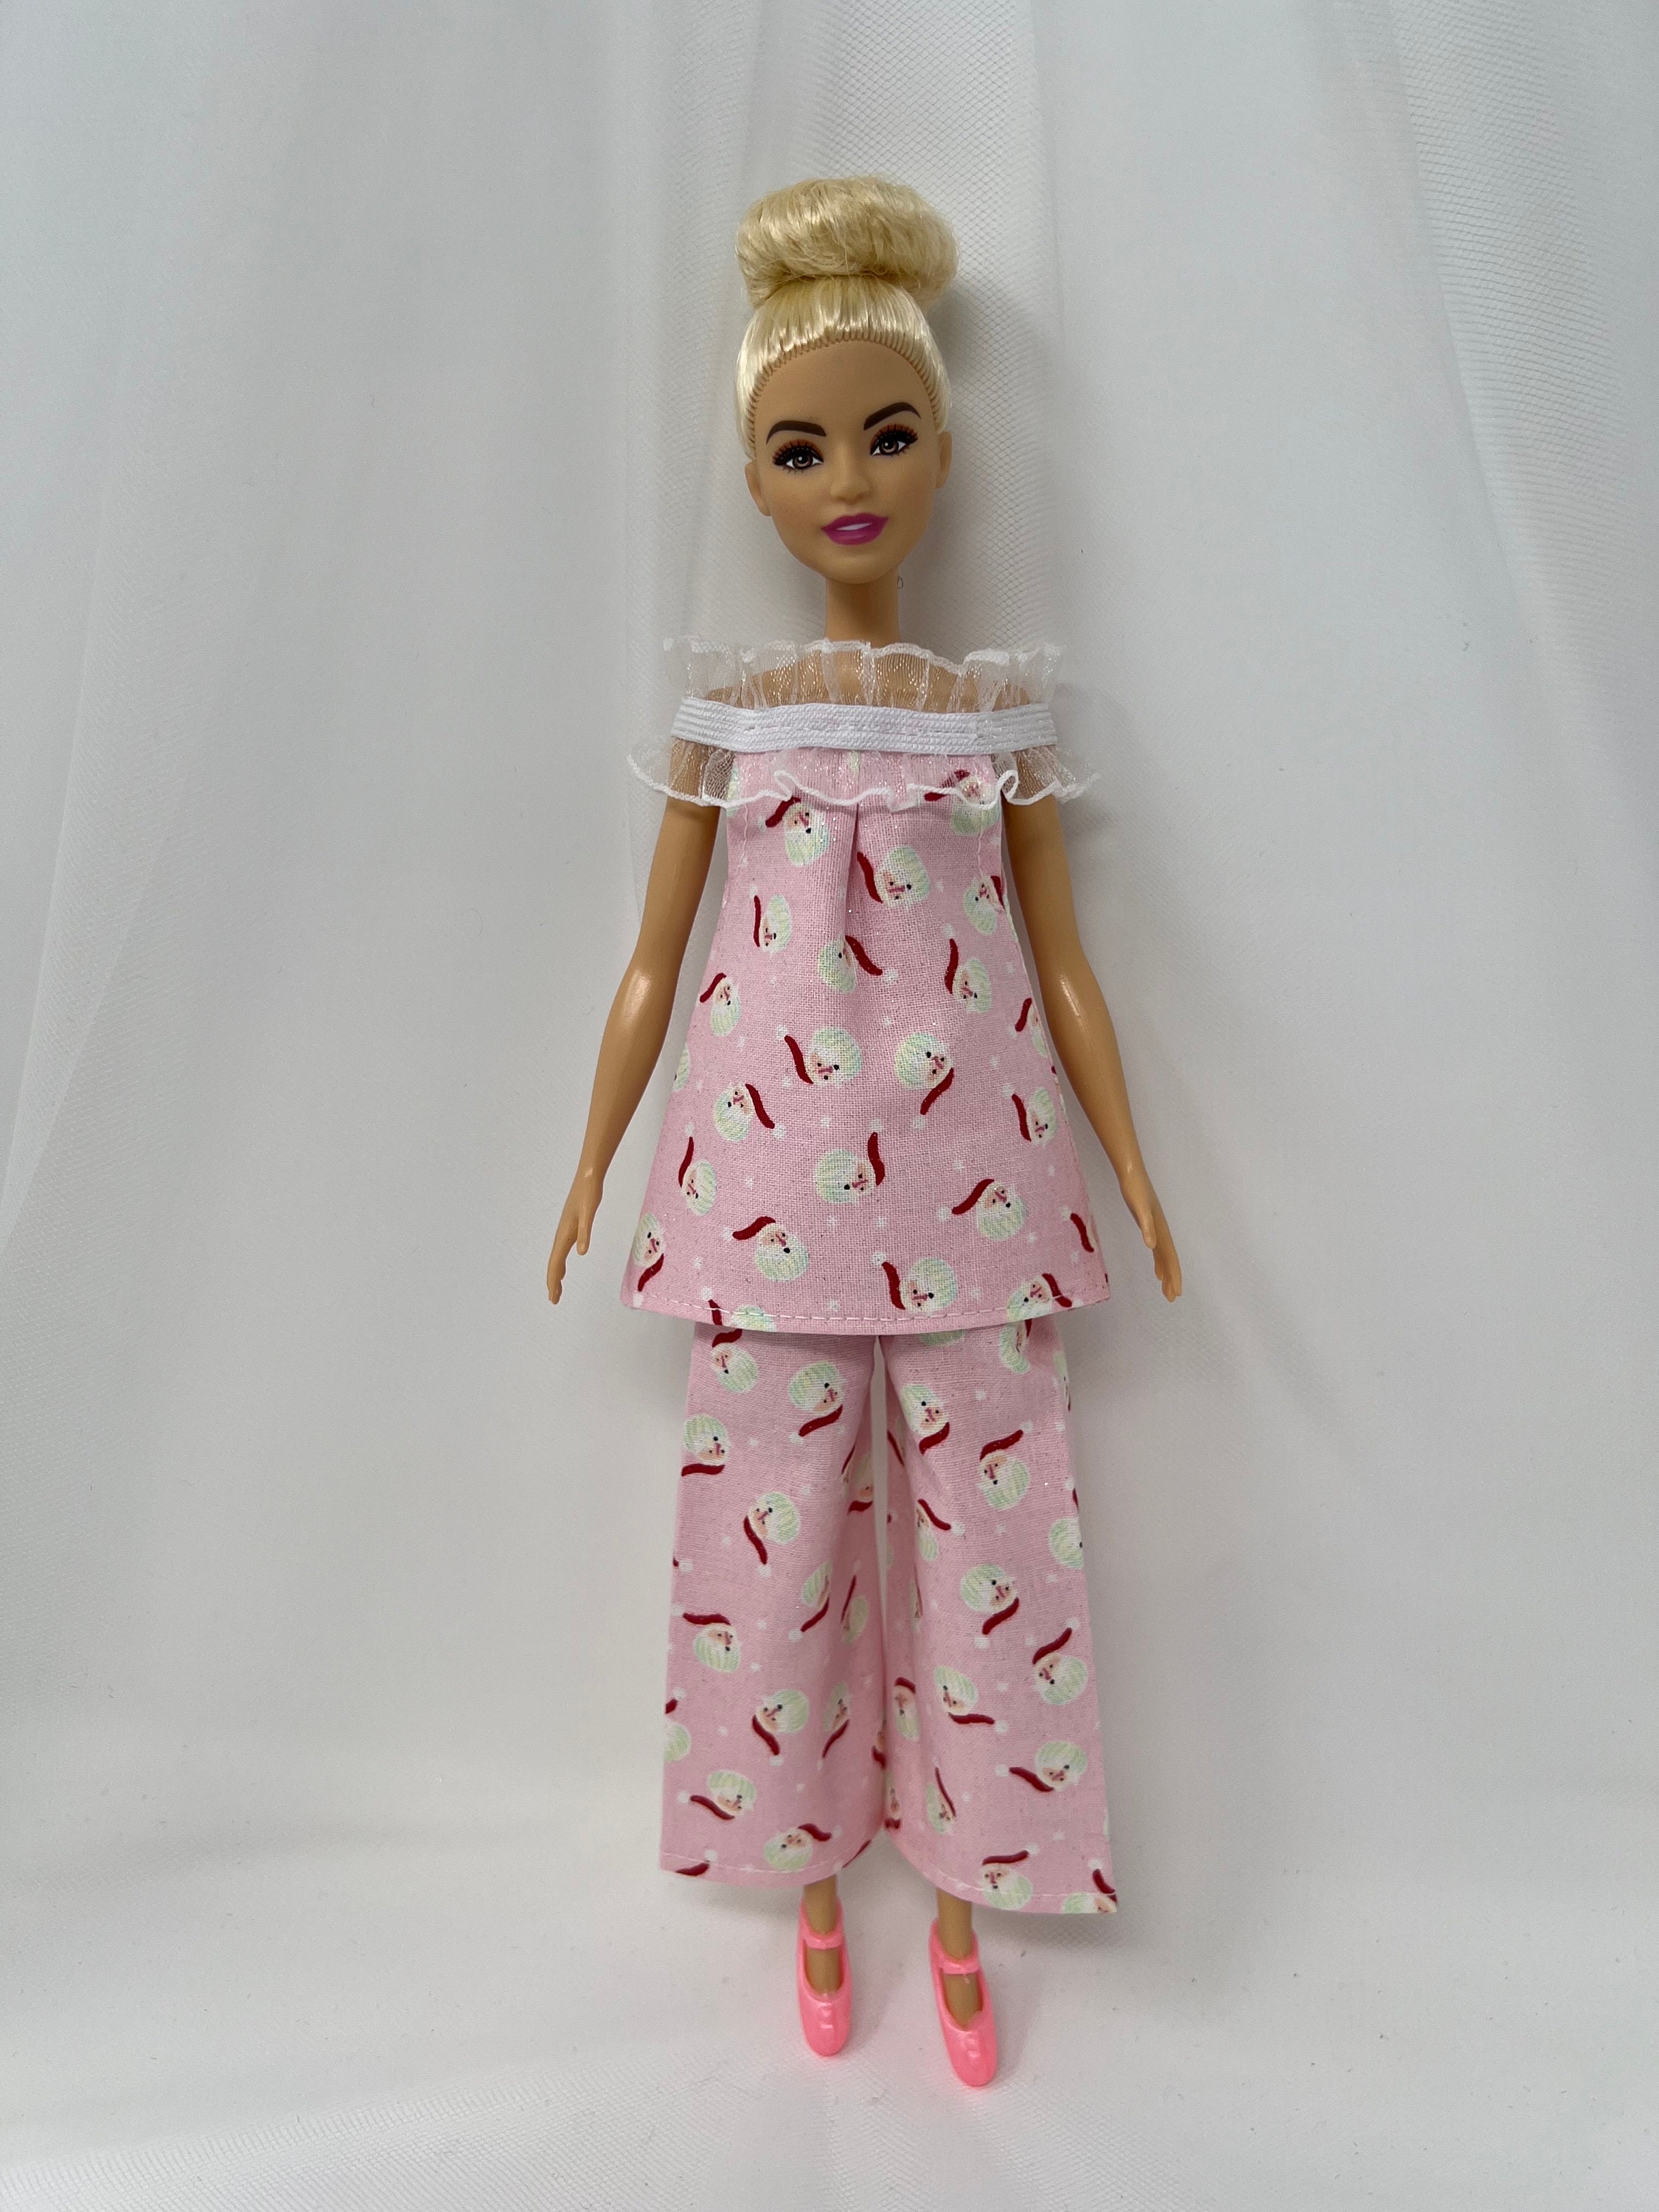 Handmade Fashion Doll Clothes 11.5 Fashion Doll Clothes for Regular, Curvy,  Ken and Sisters Blue Christmas Gingerbread Barbie Pajamas 